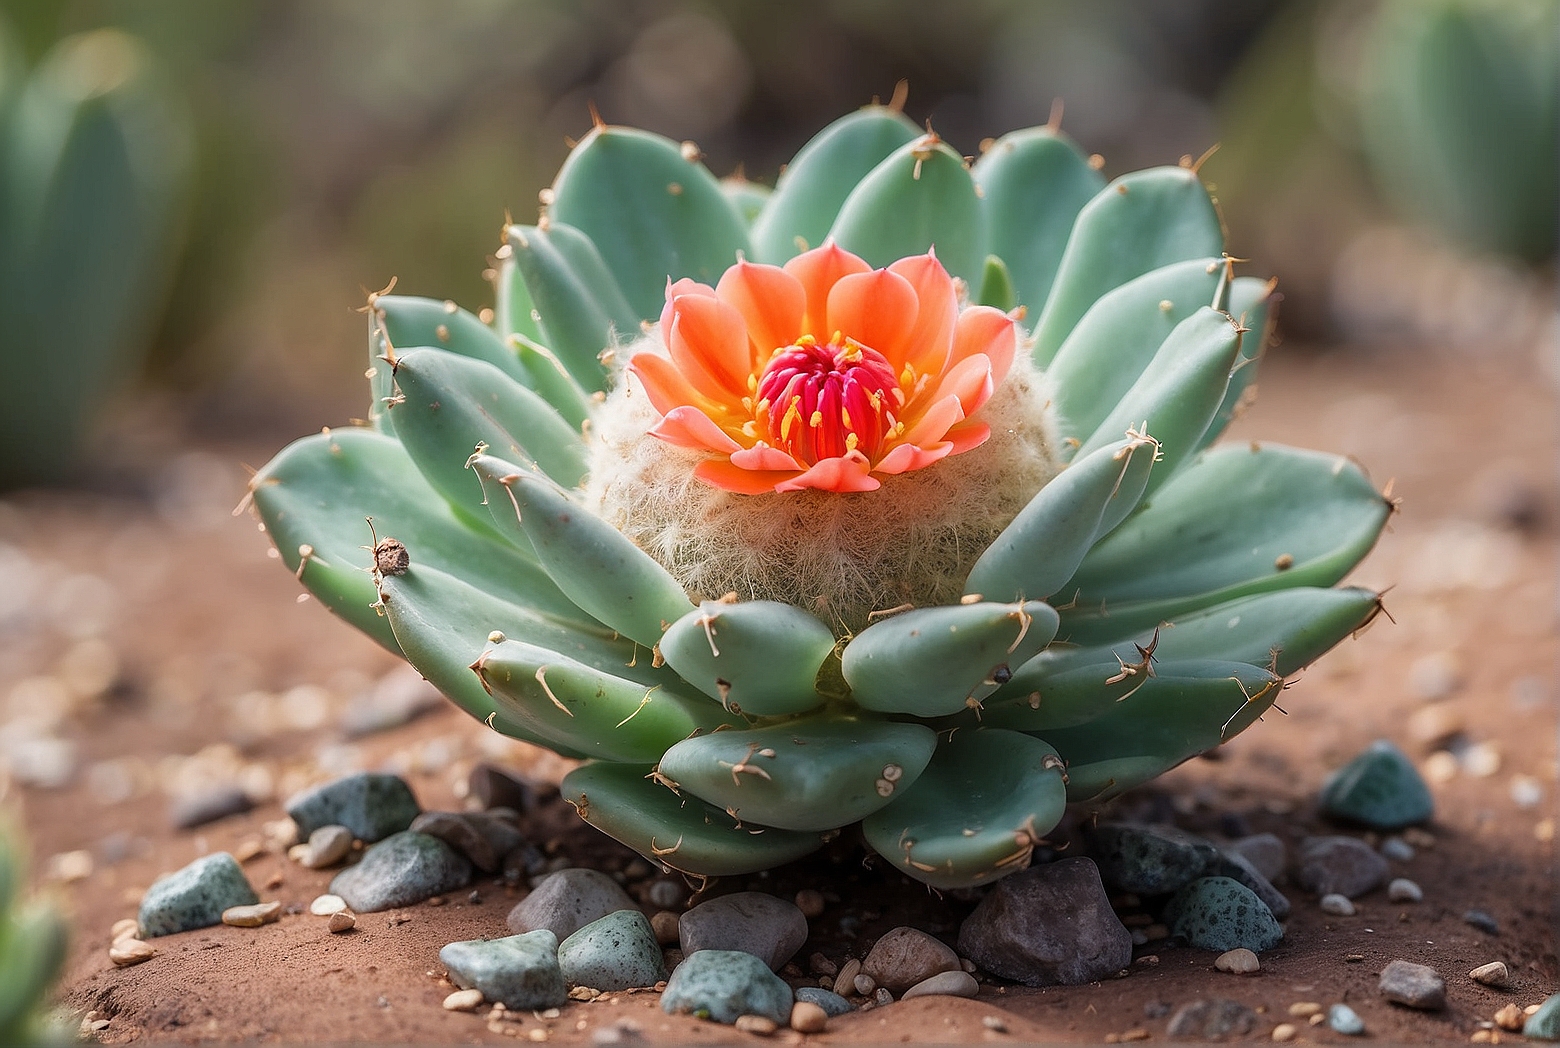 The Truth About Peyote Cactus: Are They Poisonous?